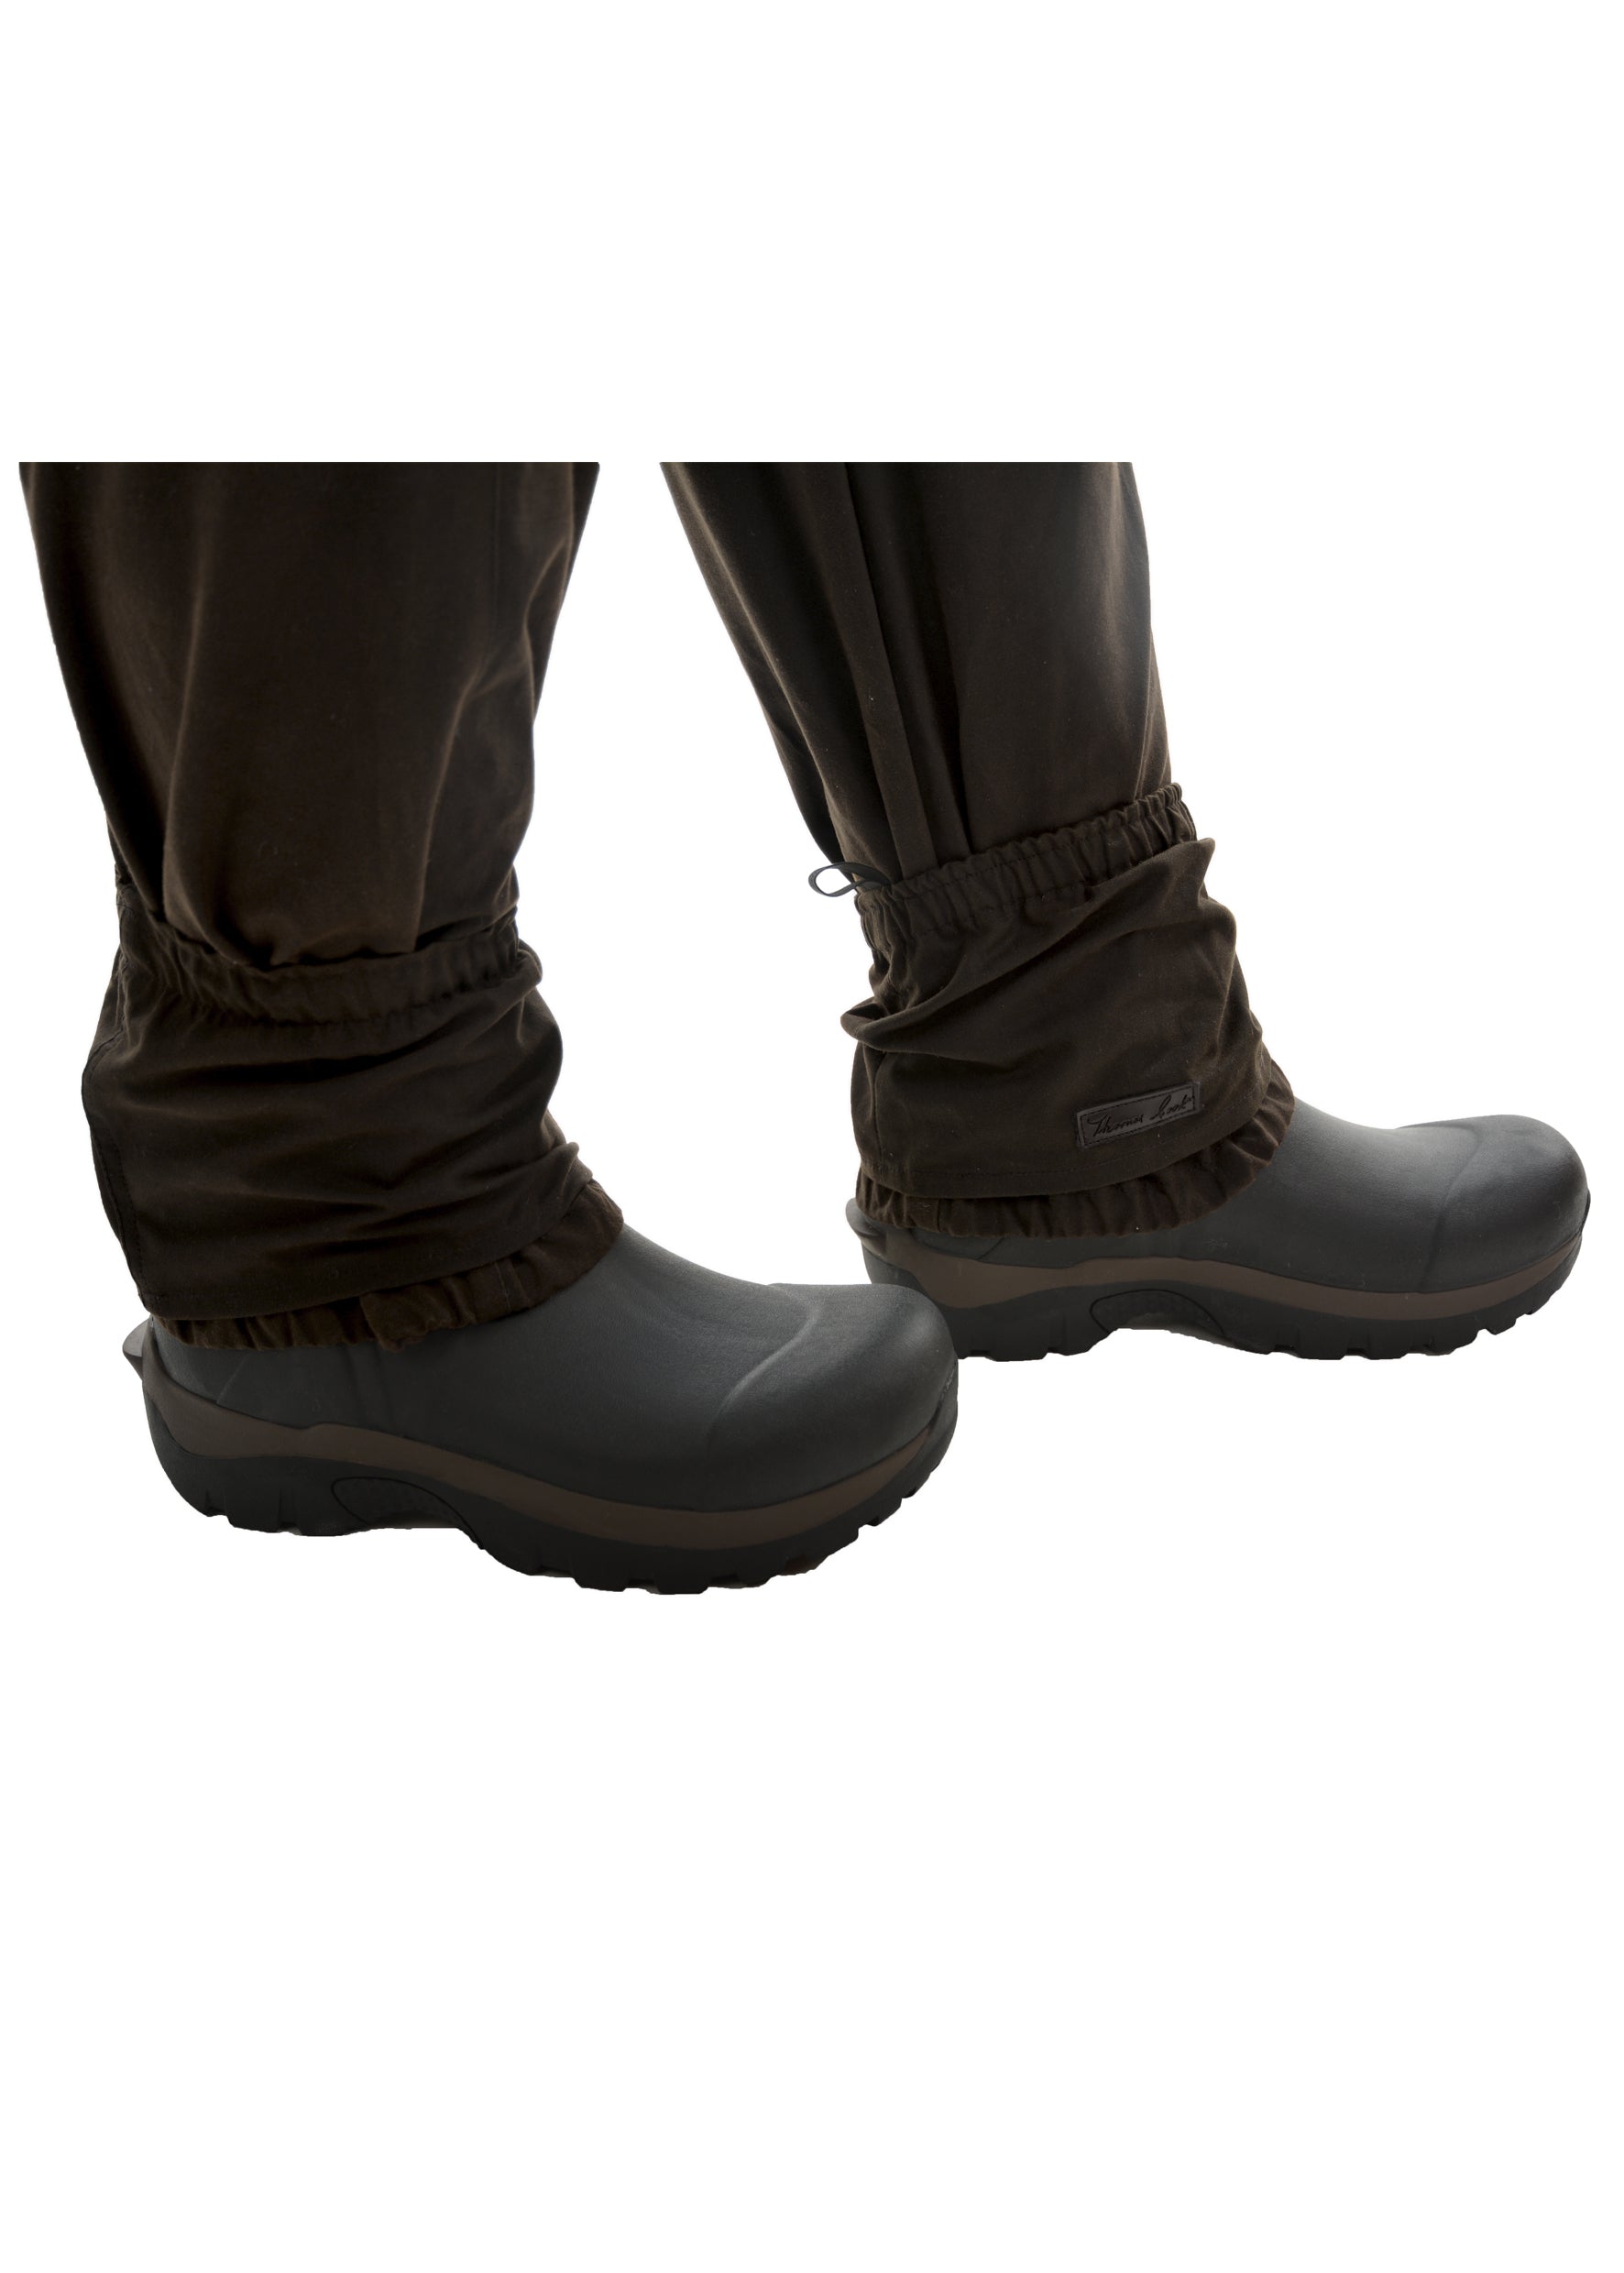 Thomas Cook High Country Short Oilskin Gaiters